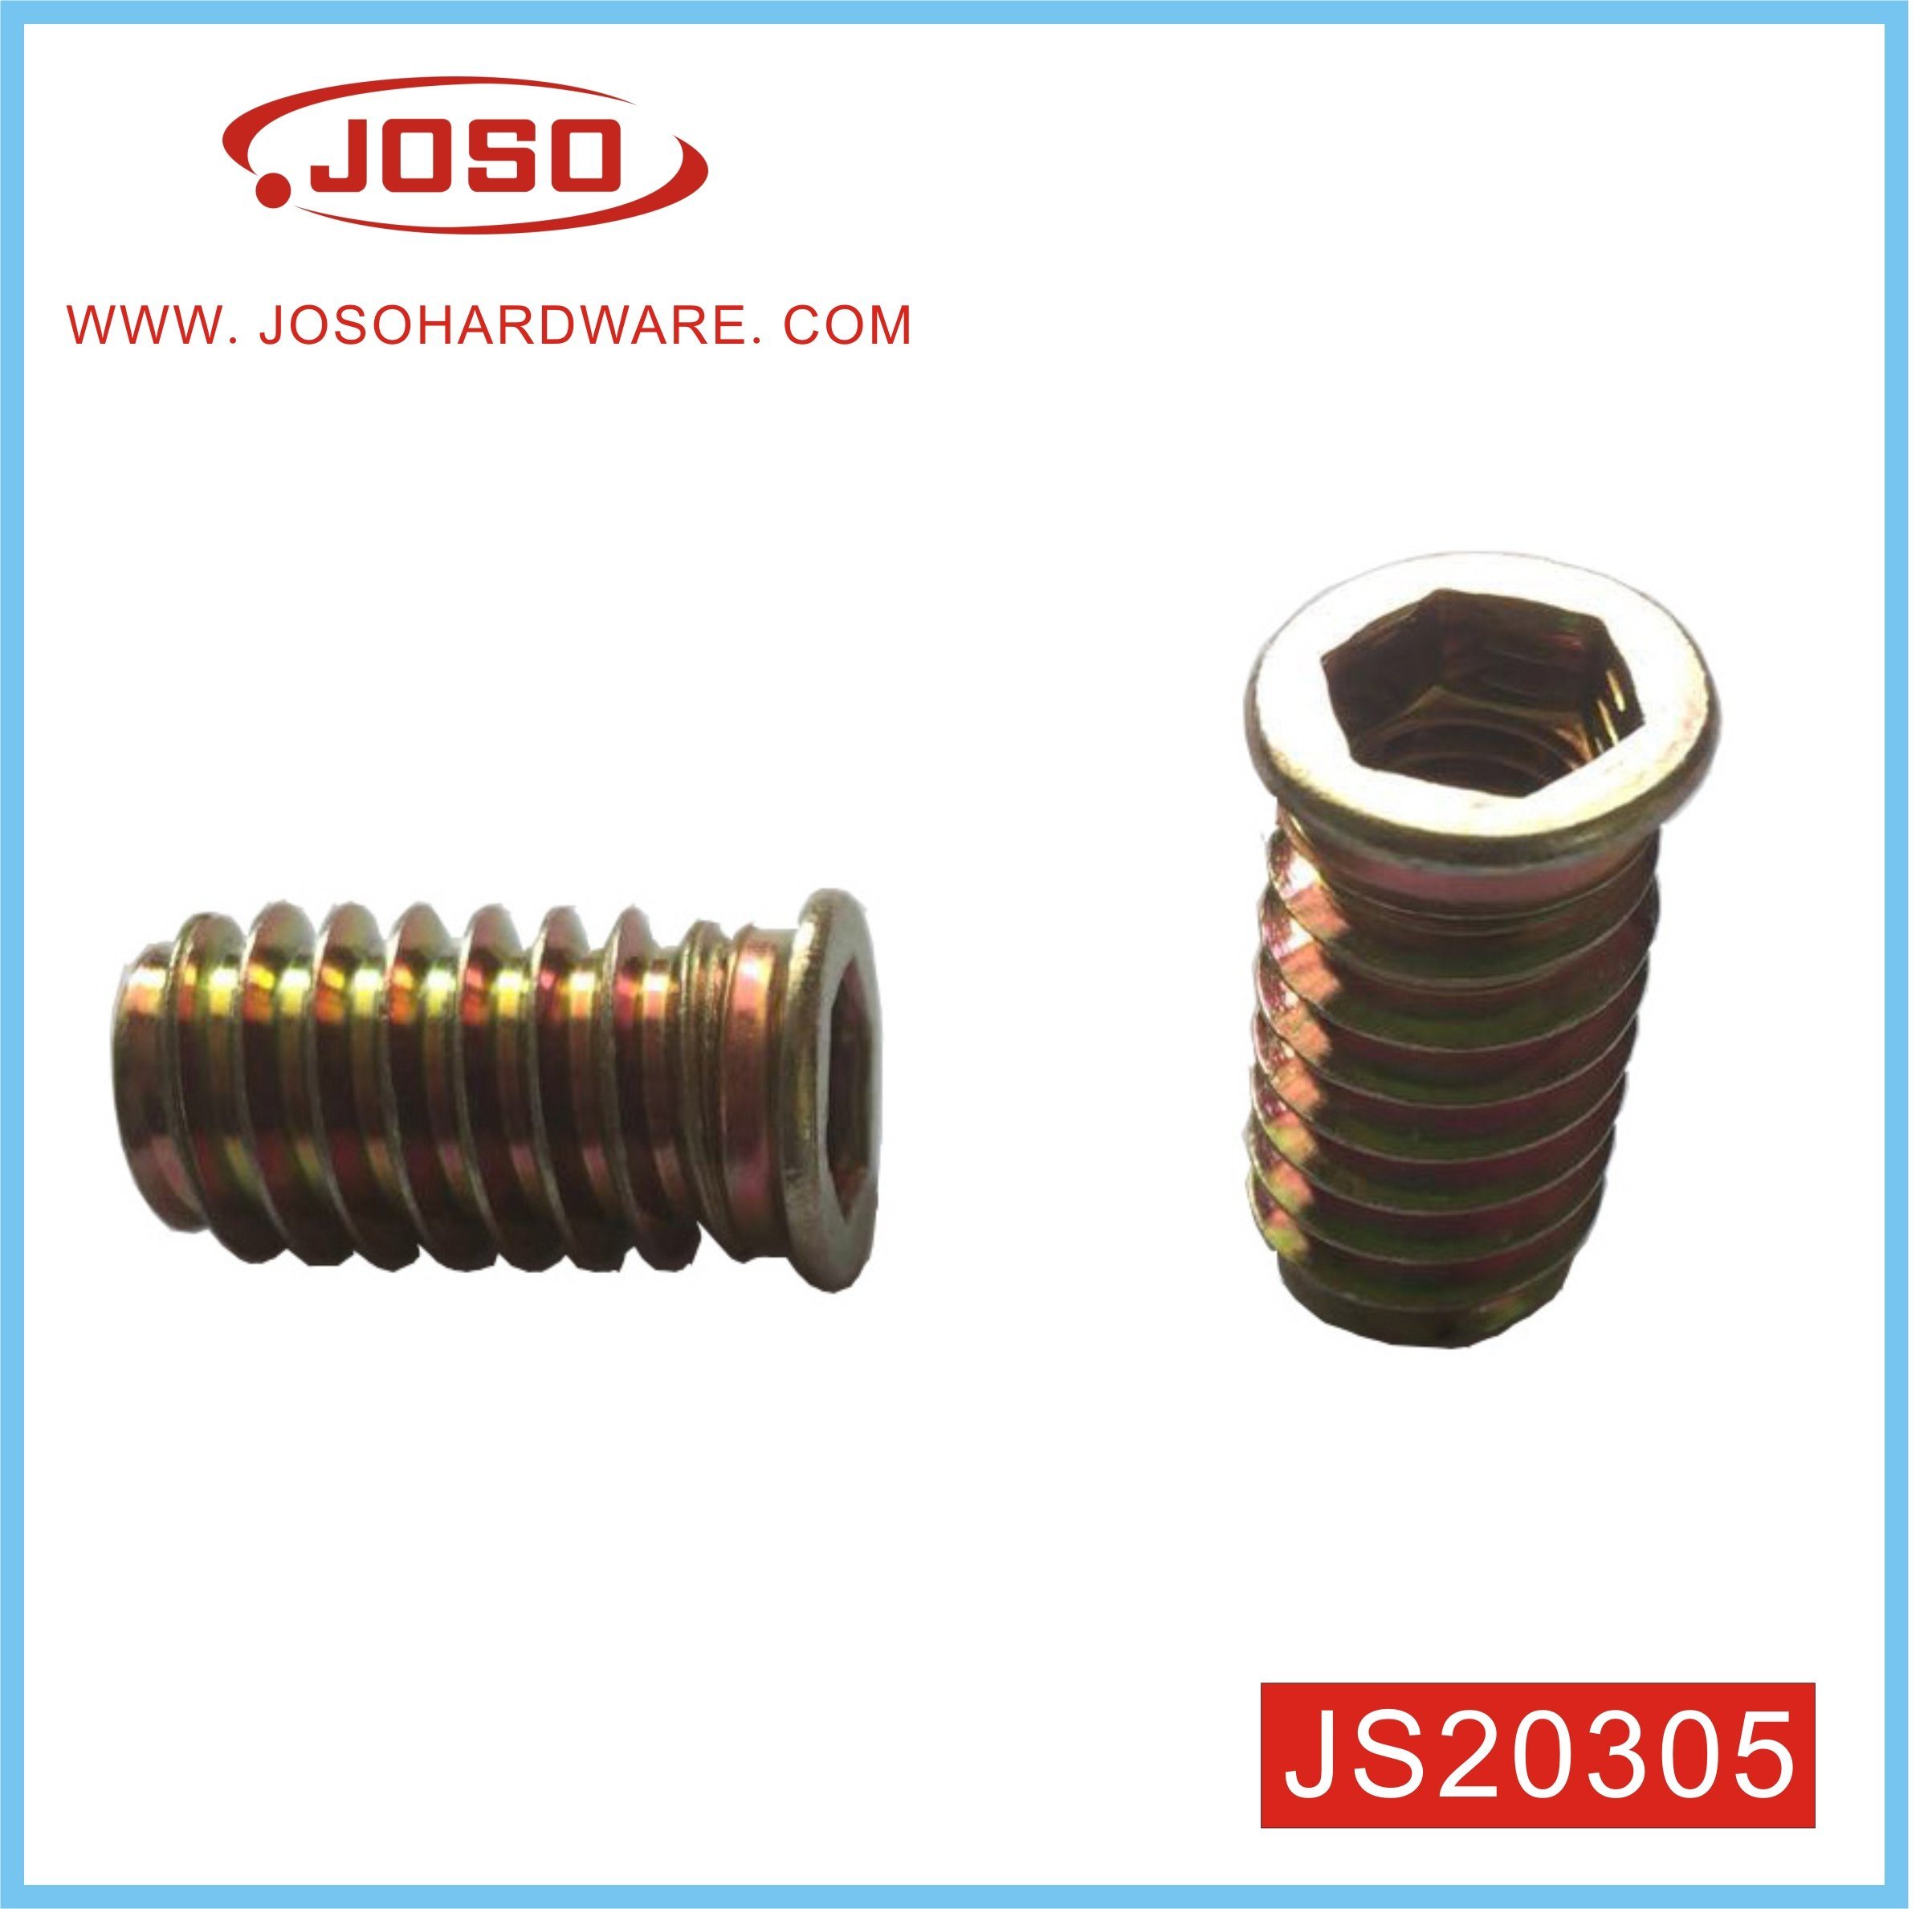 Hot Selling High Quality Metal Insert Nut for Wardrobe